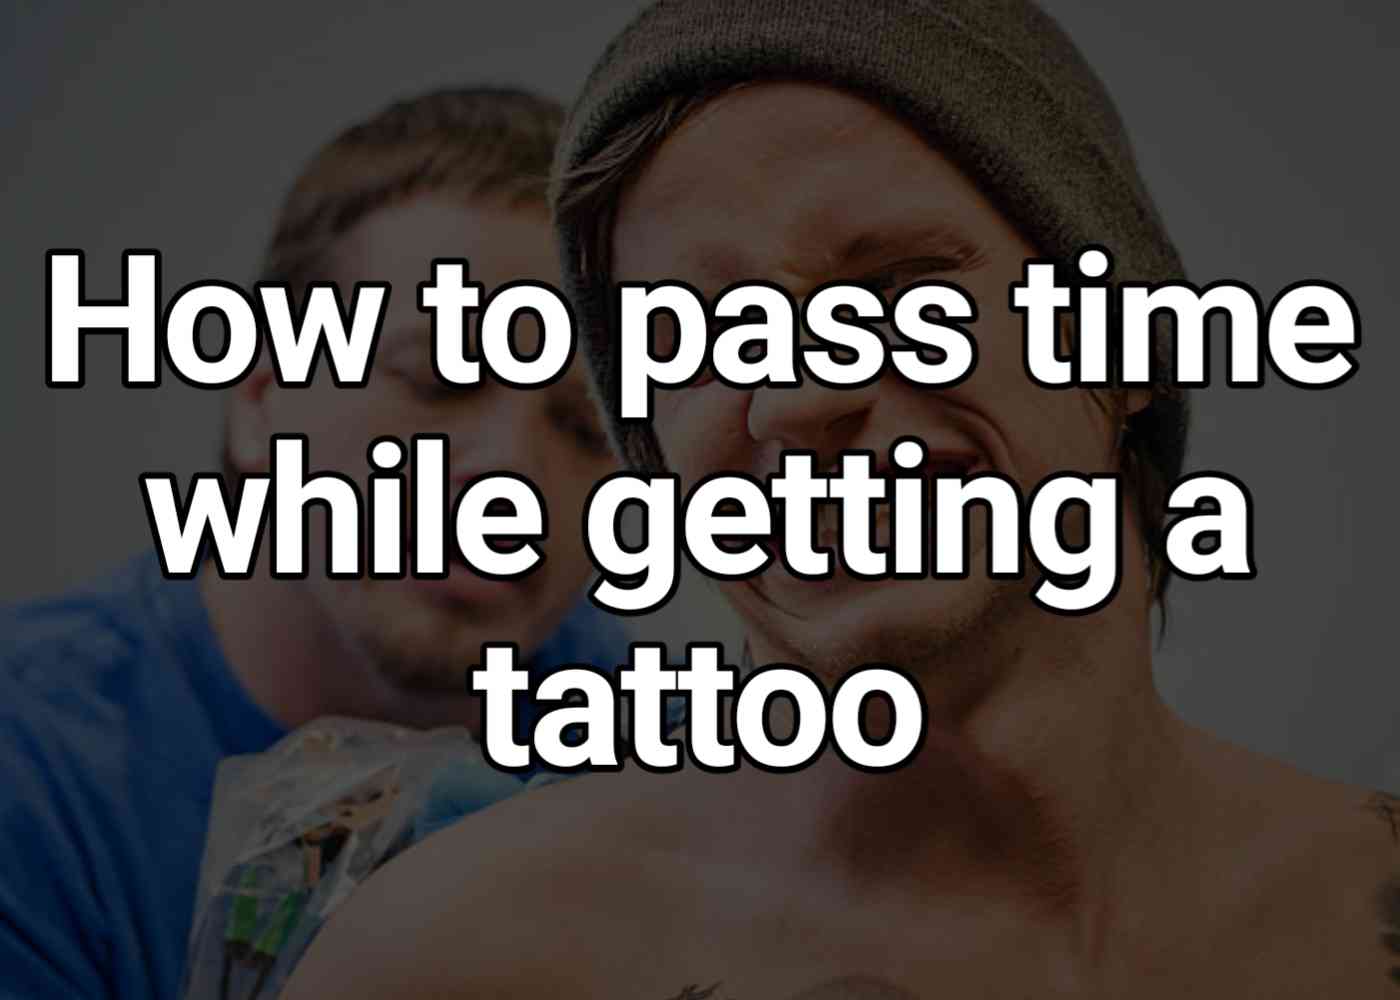 How to pass time while getting a tattoo